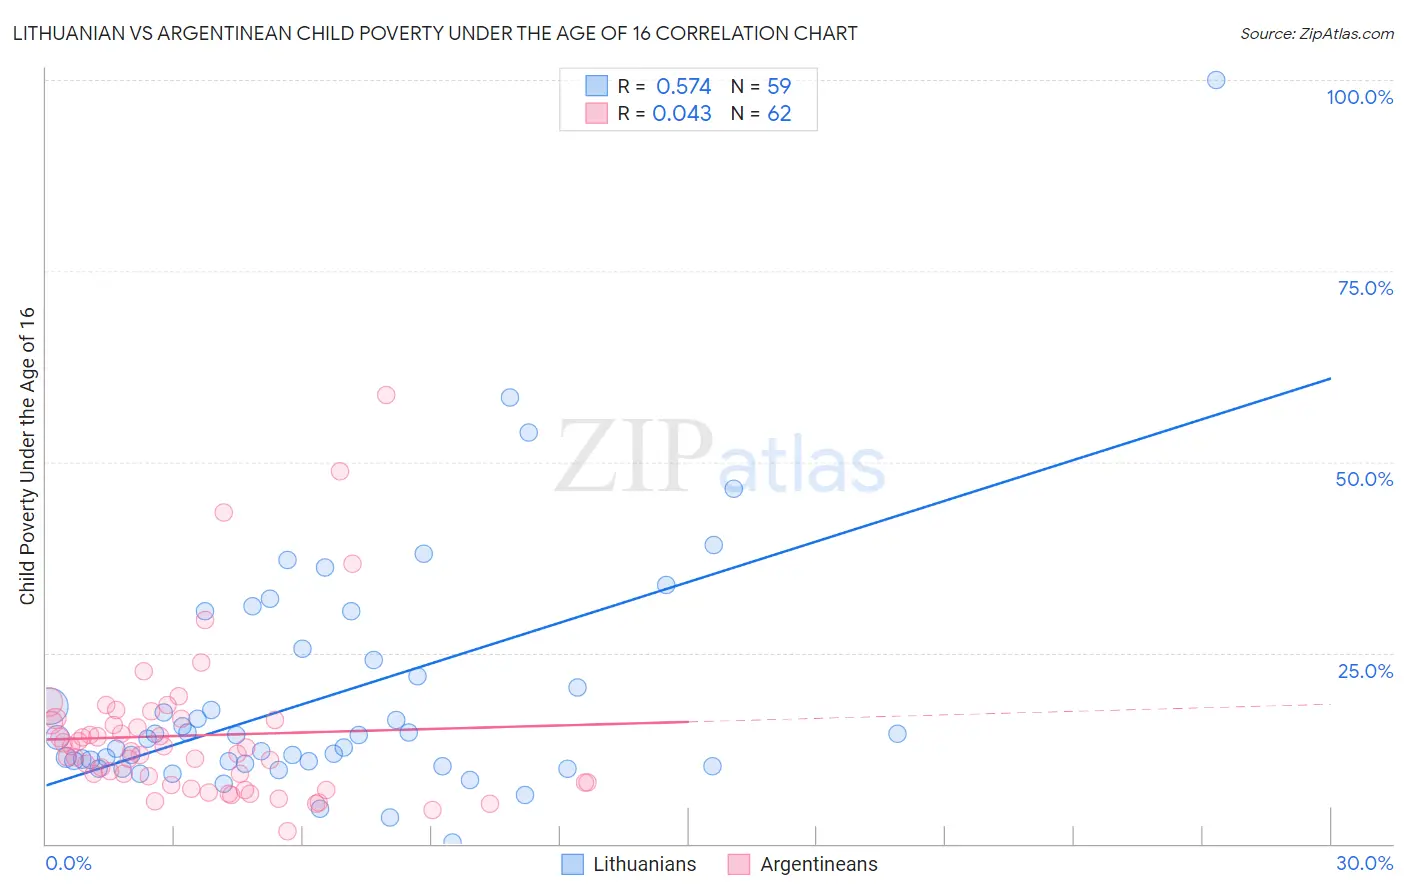 Lithuanian vs Argentinean Child Poverty Under the Age of 16